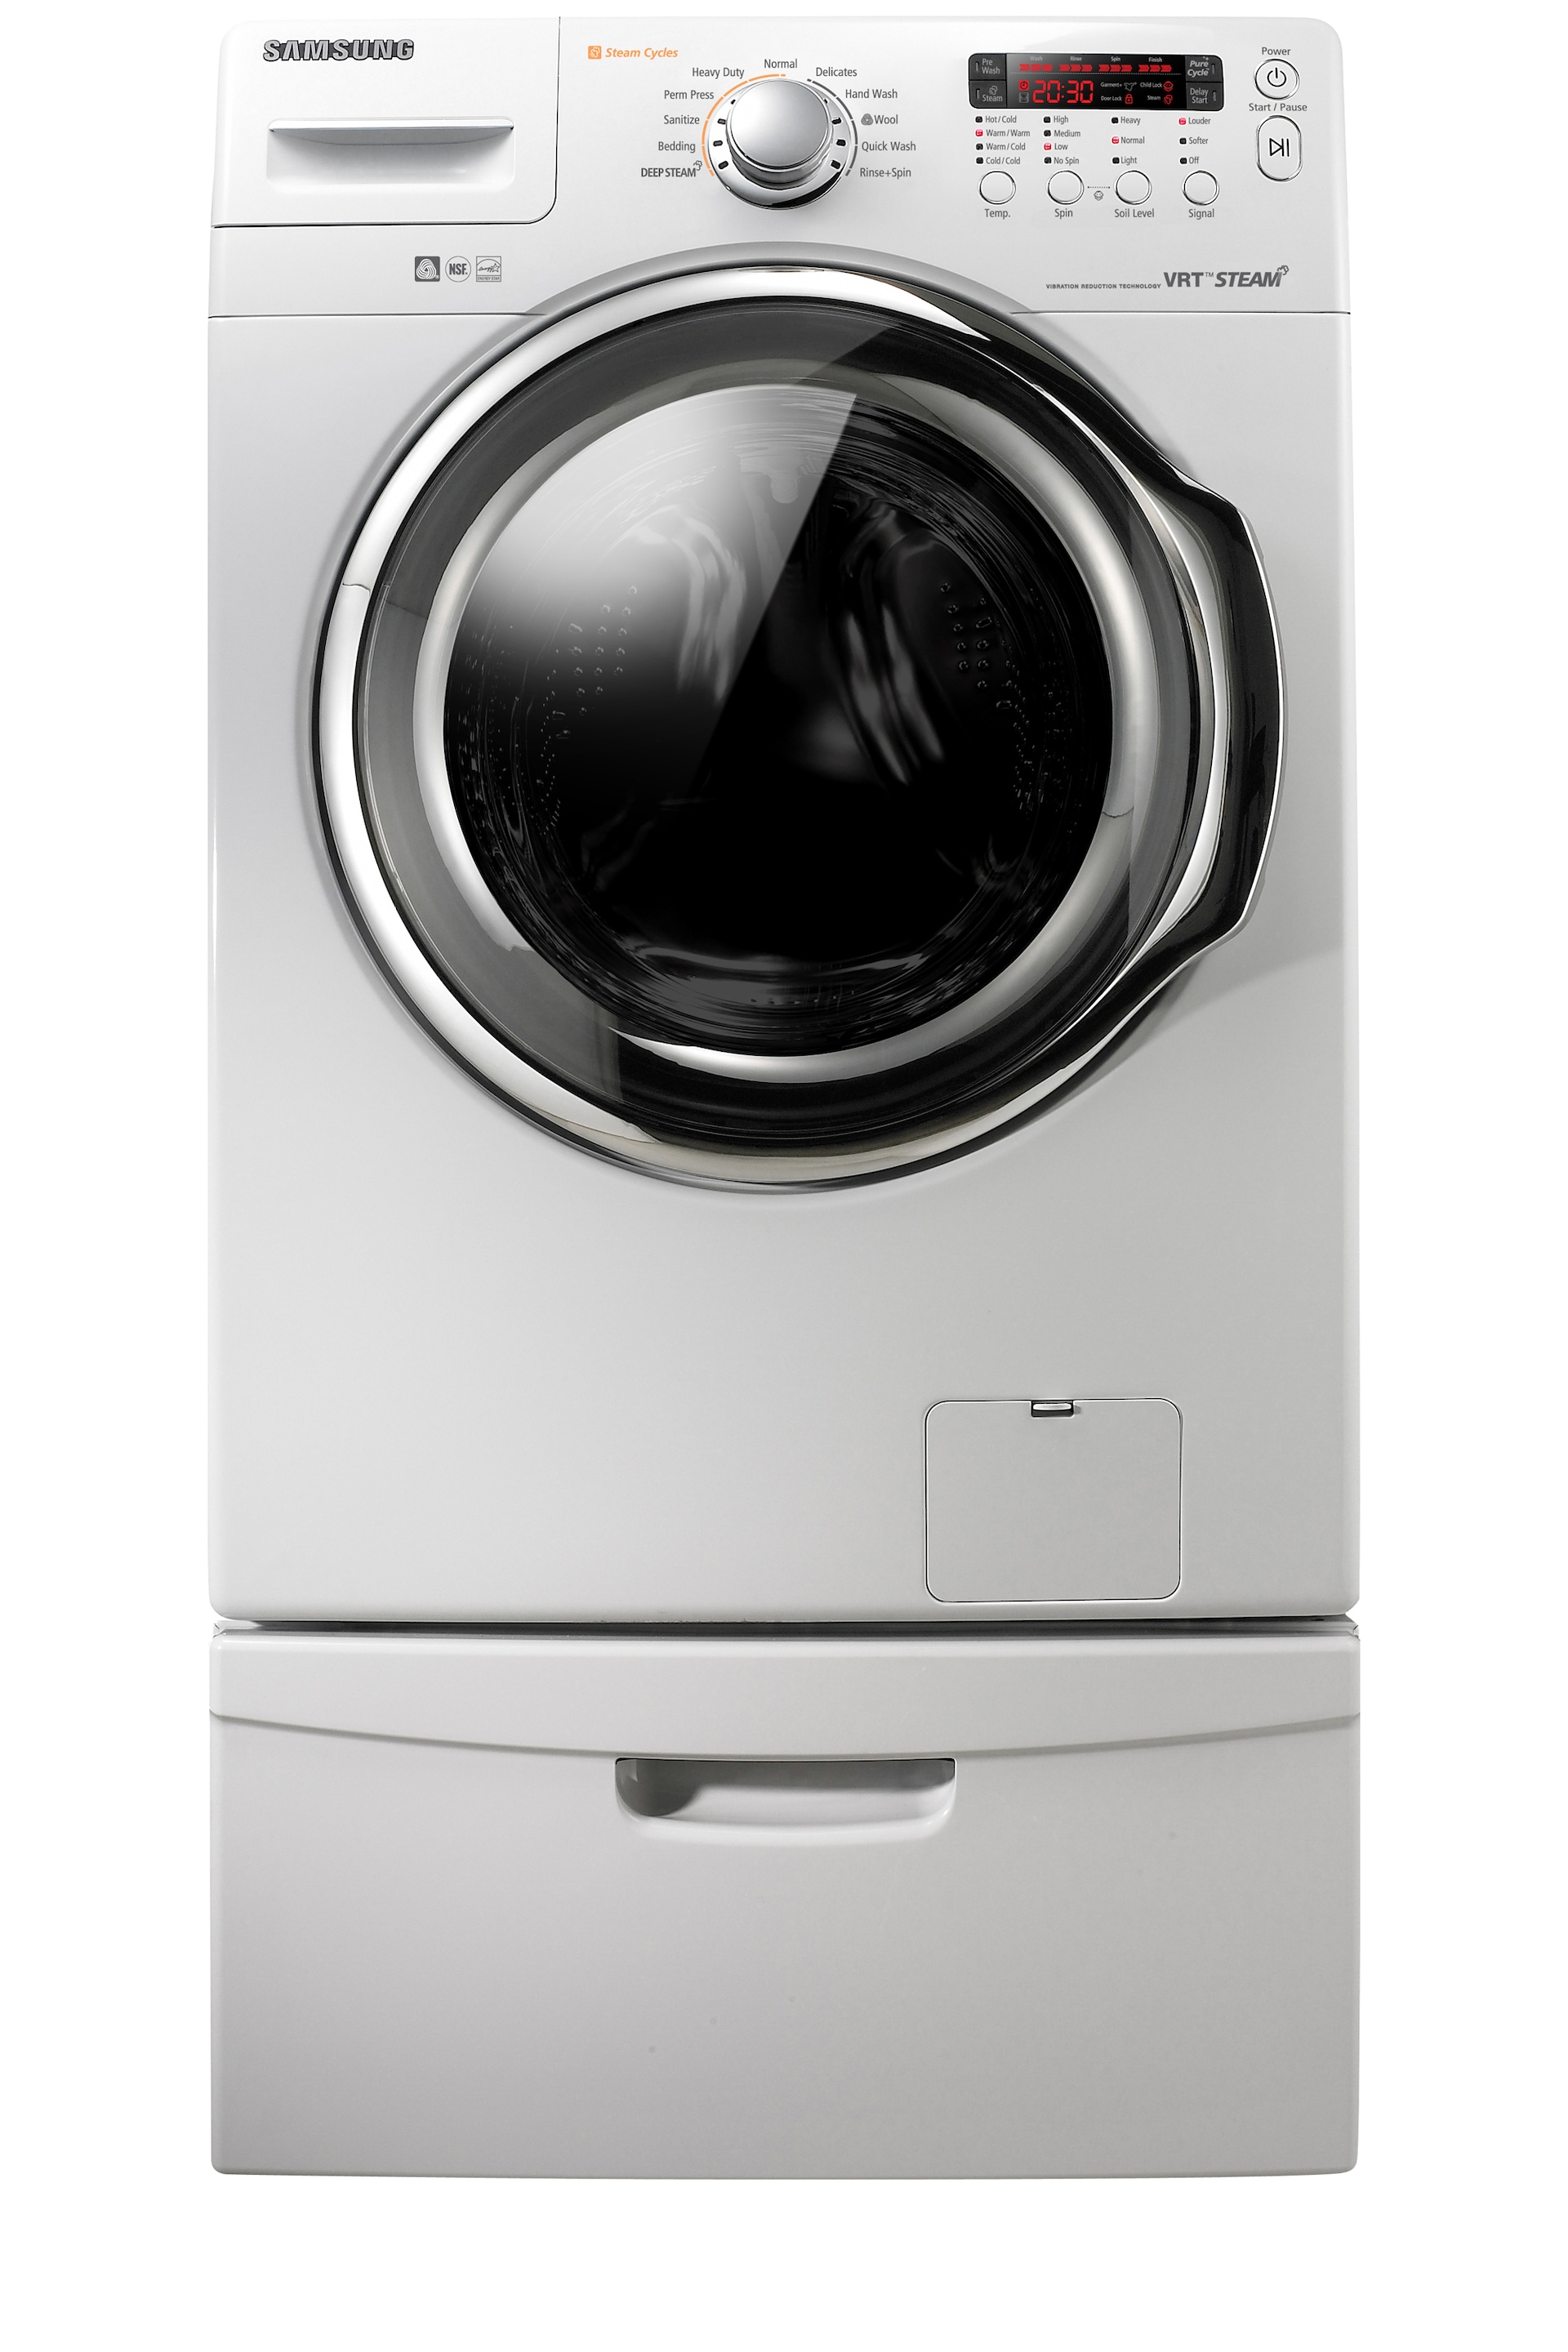 WF331ANW 4.3 cu. ft. Front Load Washer White | SAMSUNG Canada